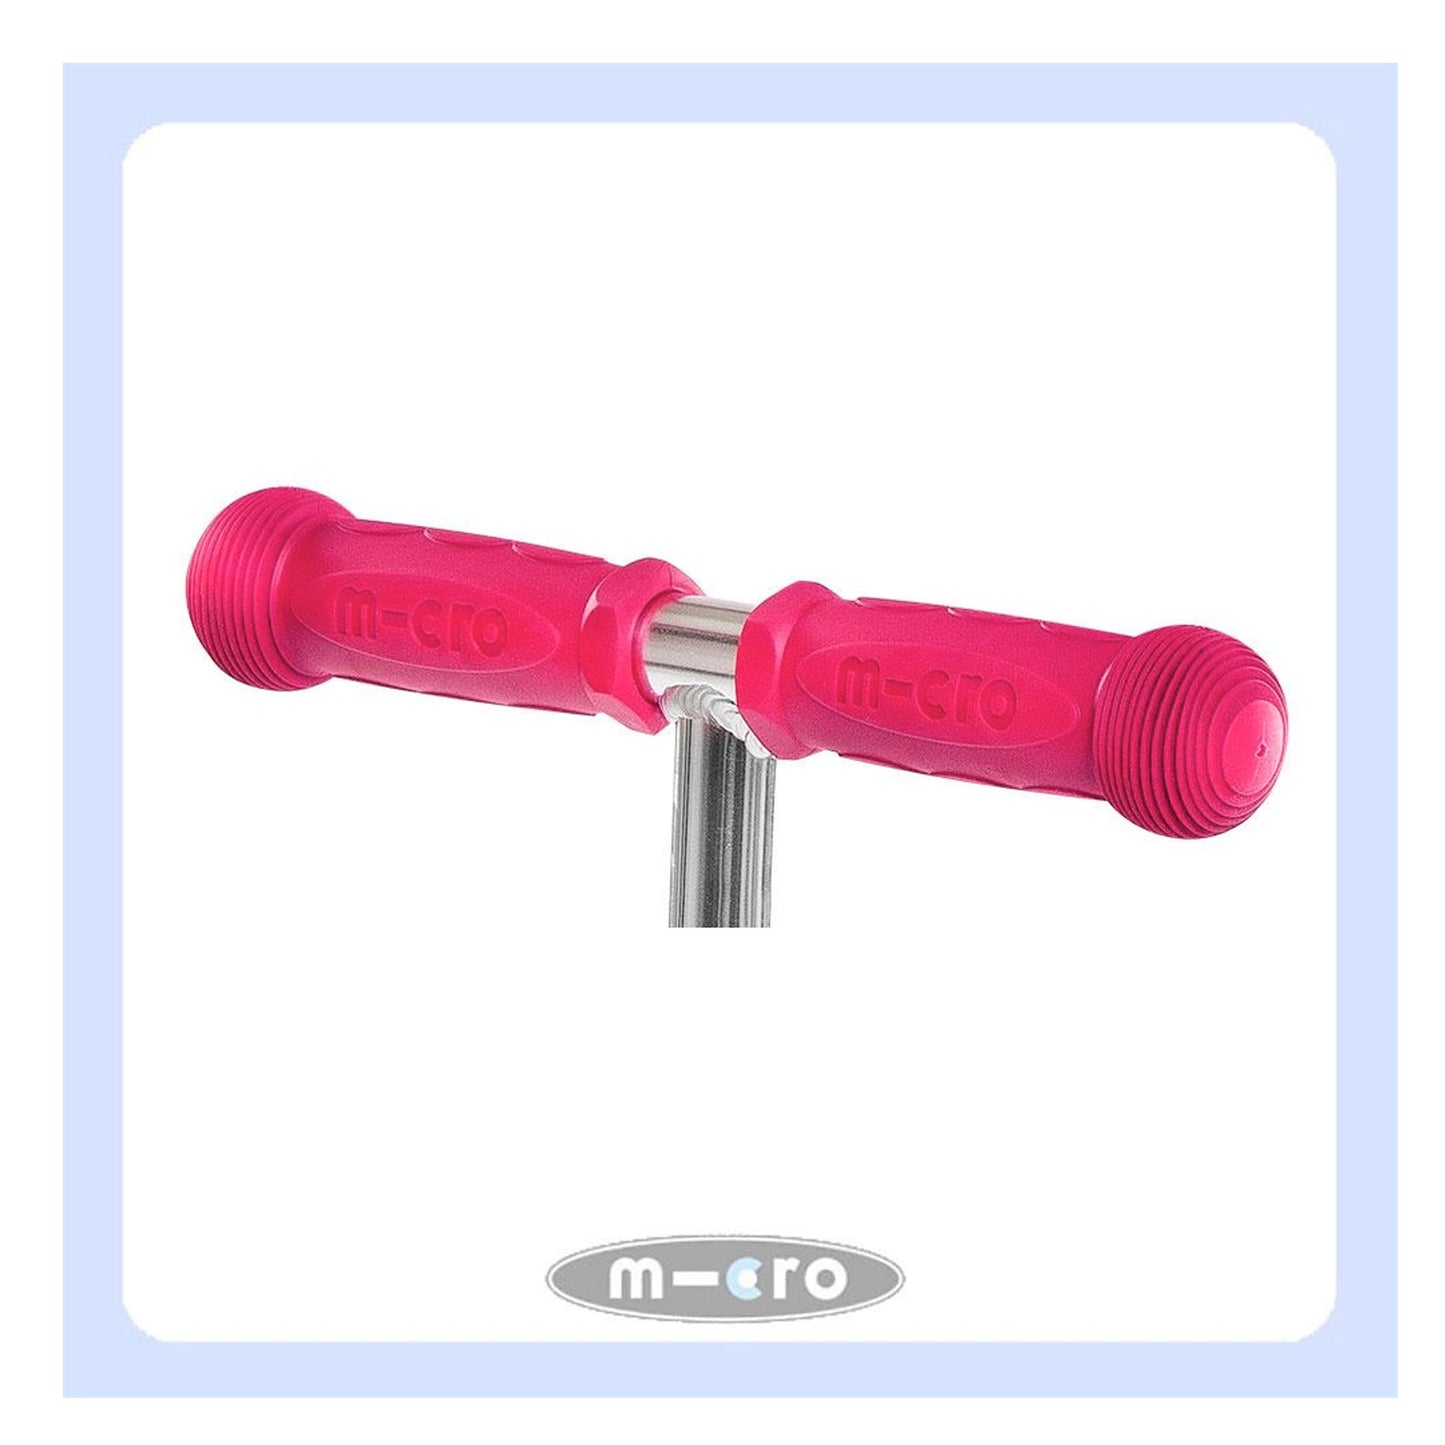 Micro Scooter Replacement Rubber Grips - Pink buy online at Woolys Wheels Sydney